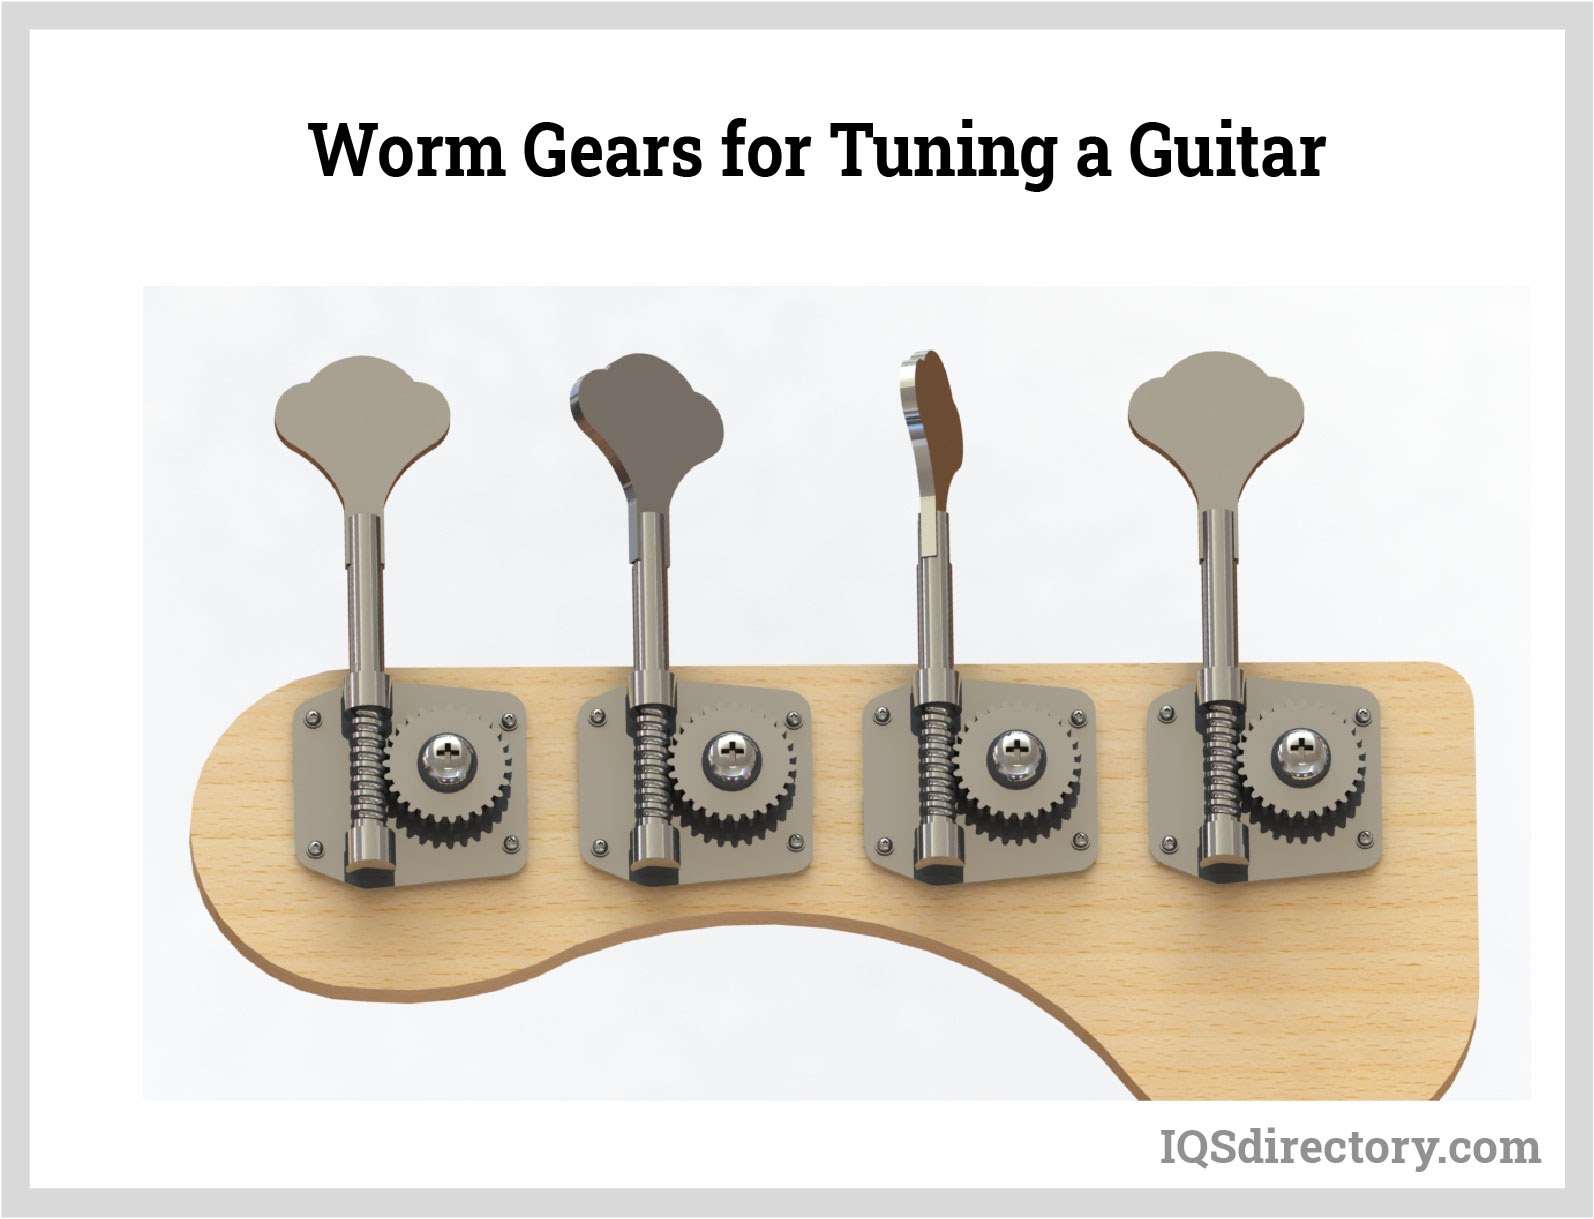 Worm Gears for Tuning a Guitar